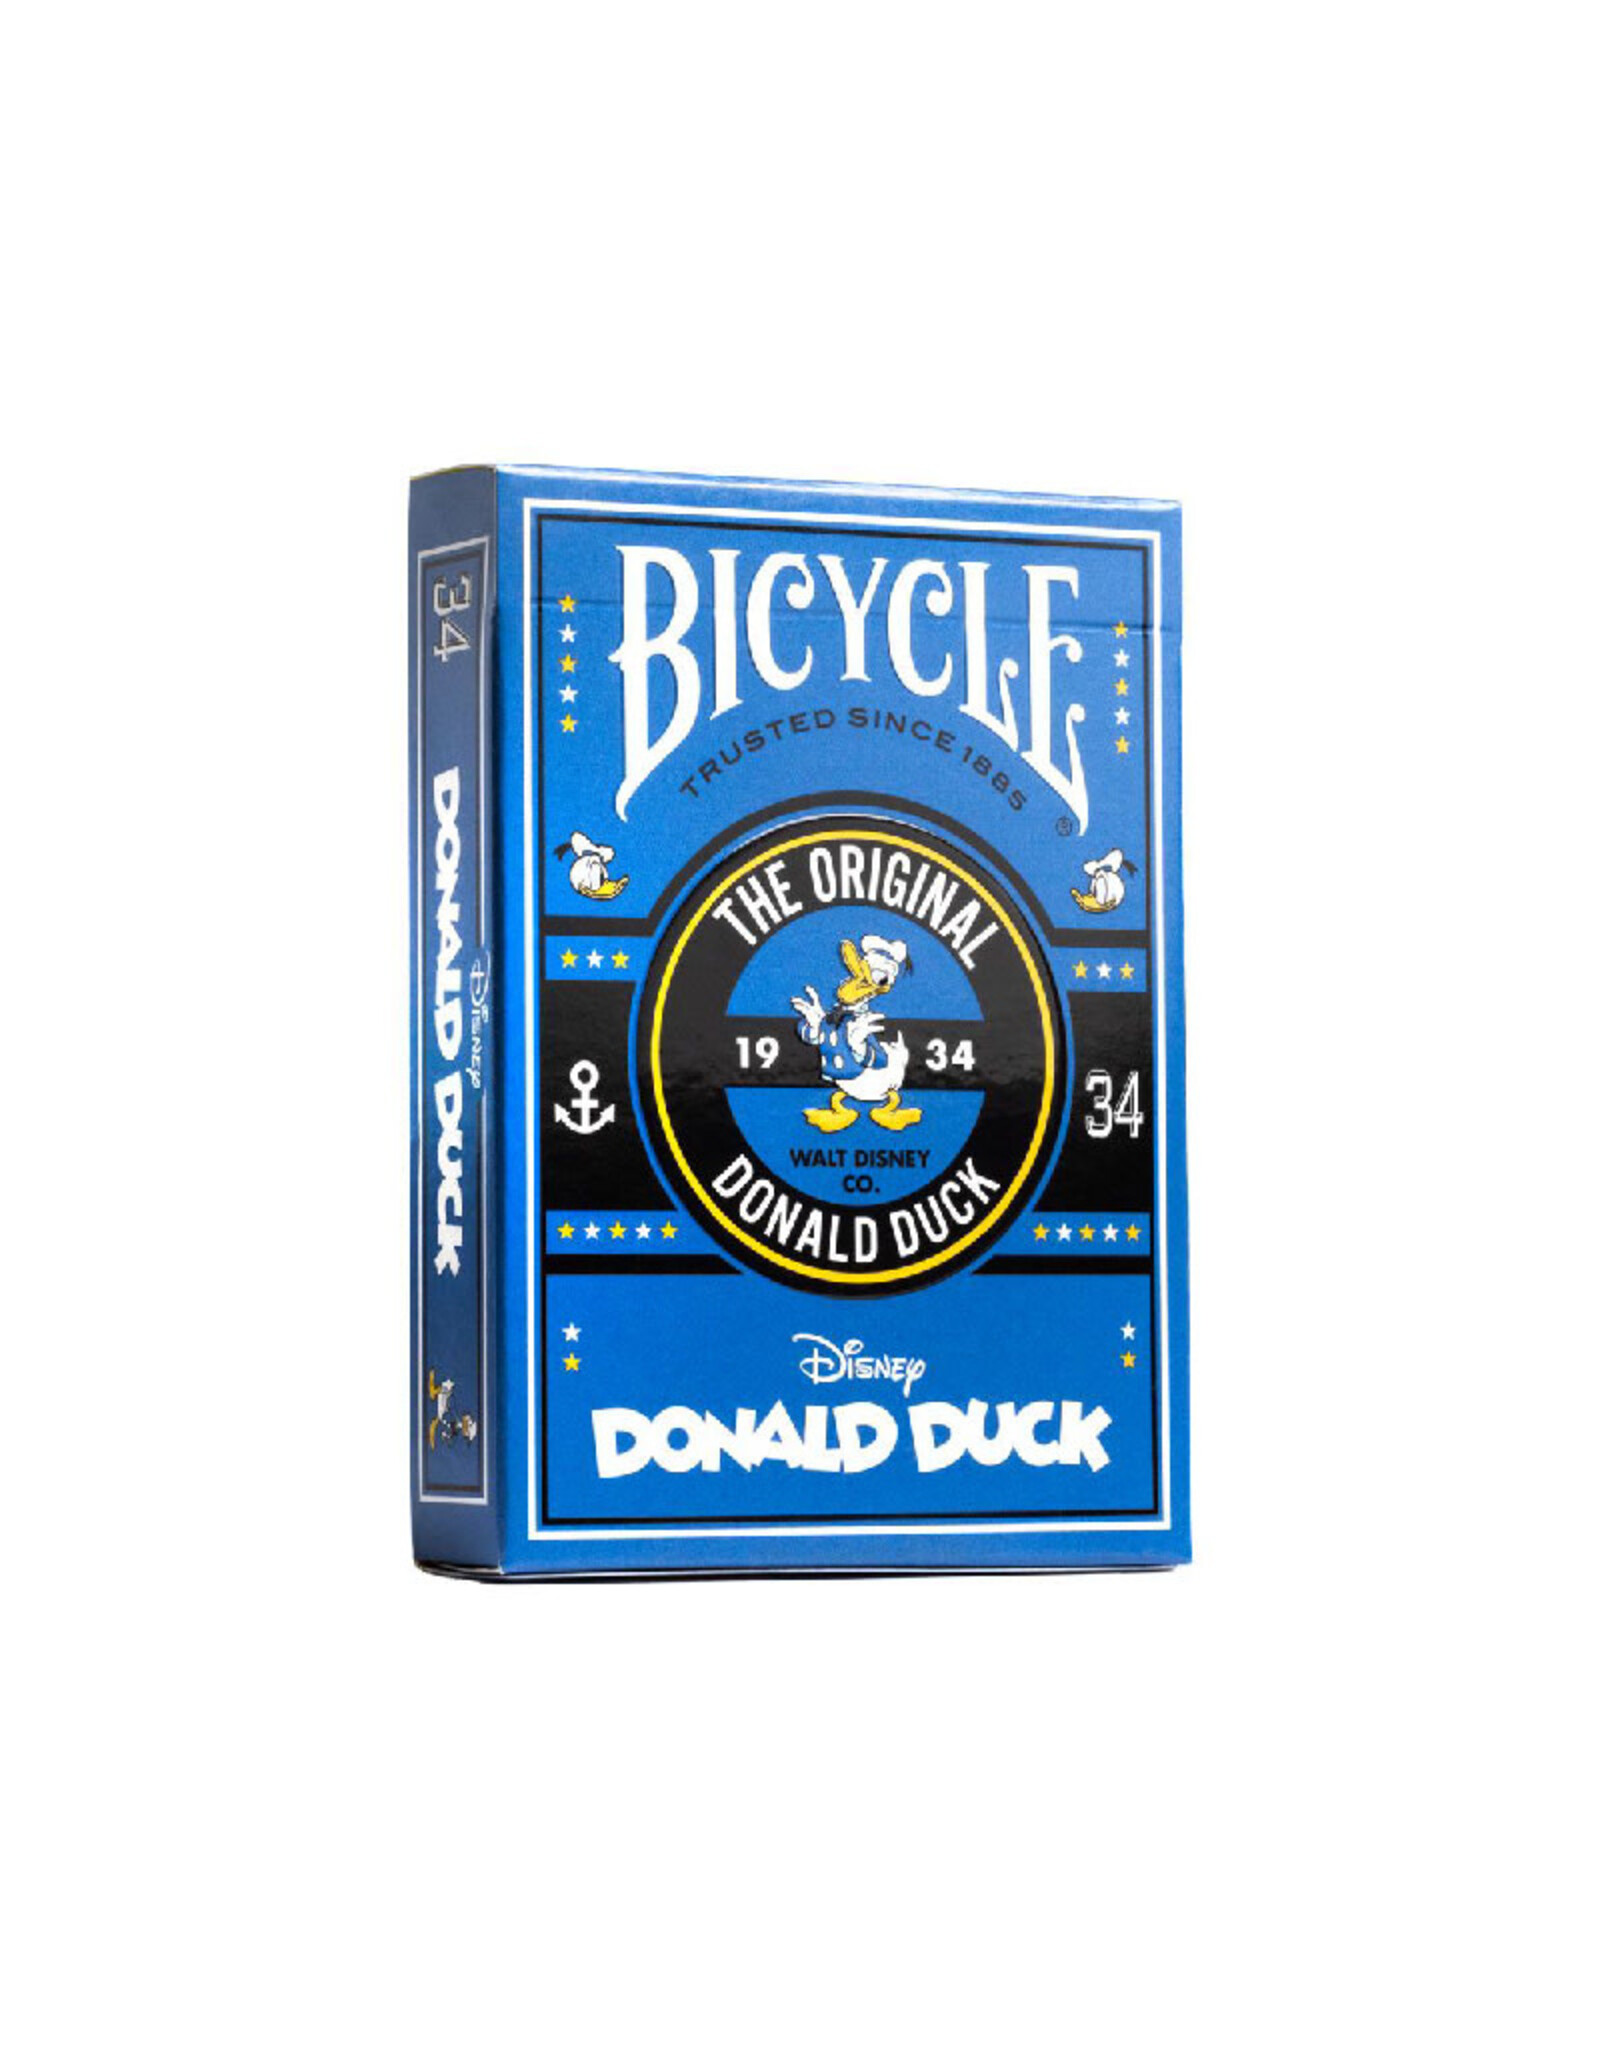 United States Playing Card Co (April 15, 2024) Playing Cards: Bicycle Disney Donald Duck